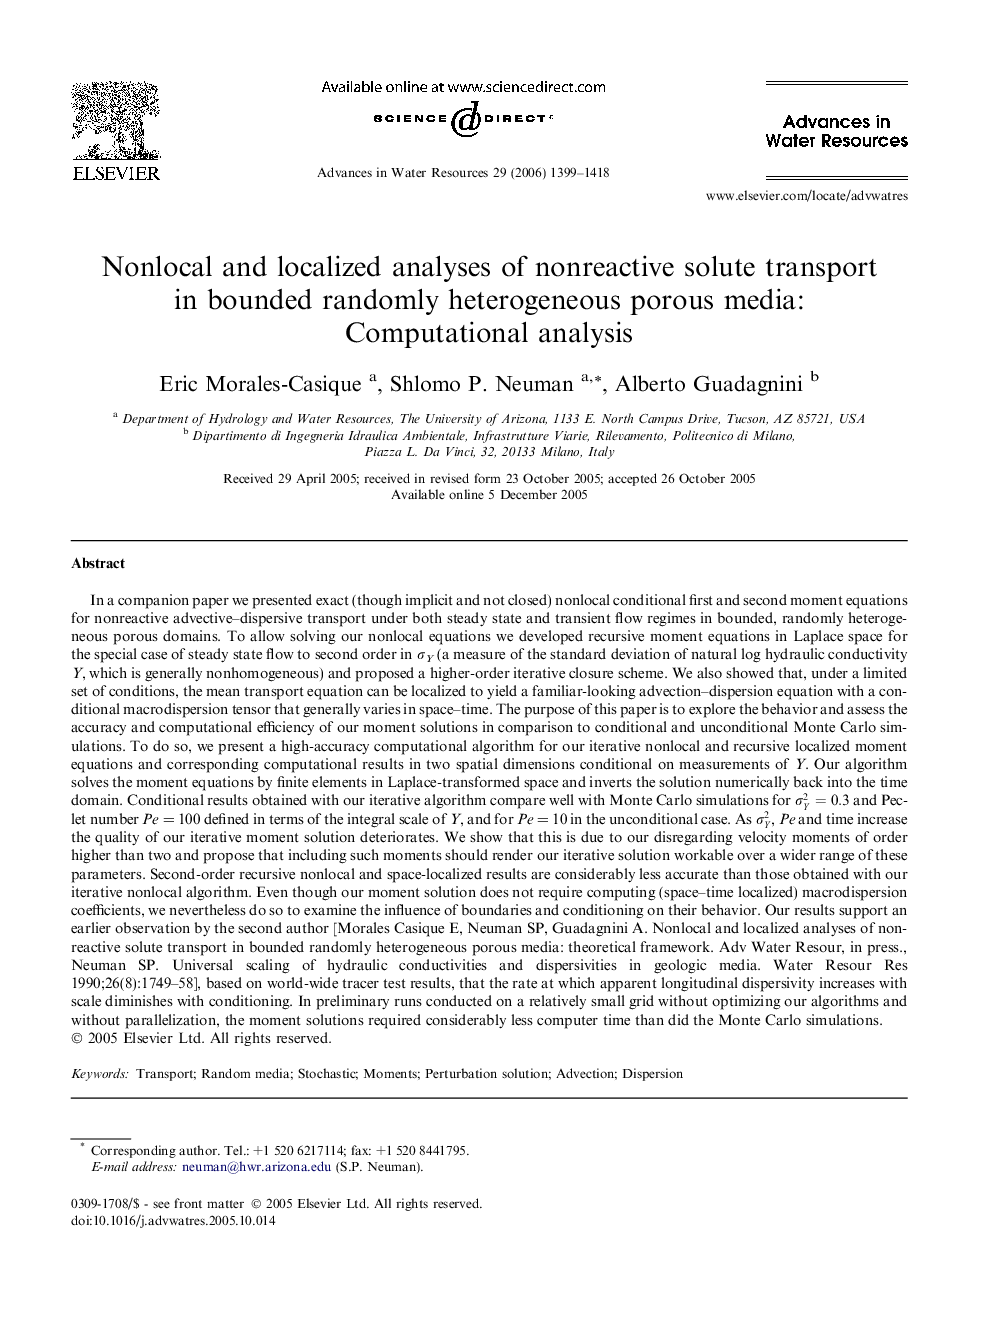 Nonlocal and localized analyses of nonreactive solute transport in bounded randomly heterogeneous porous media: Computational analysis